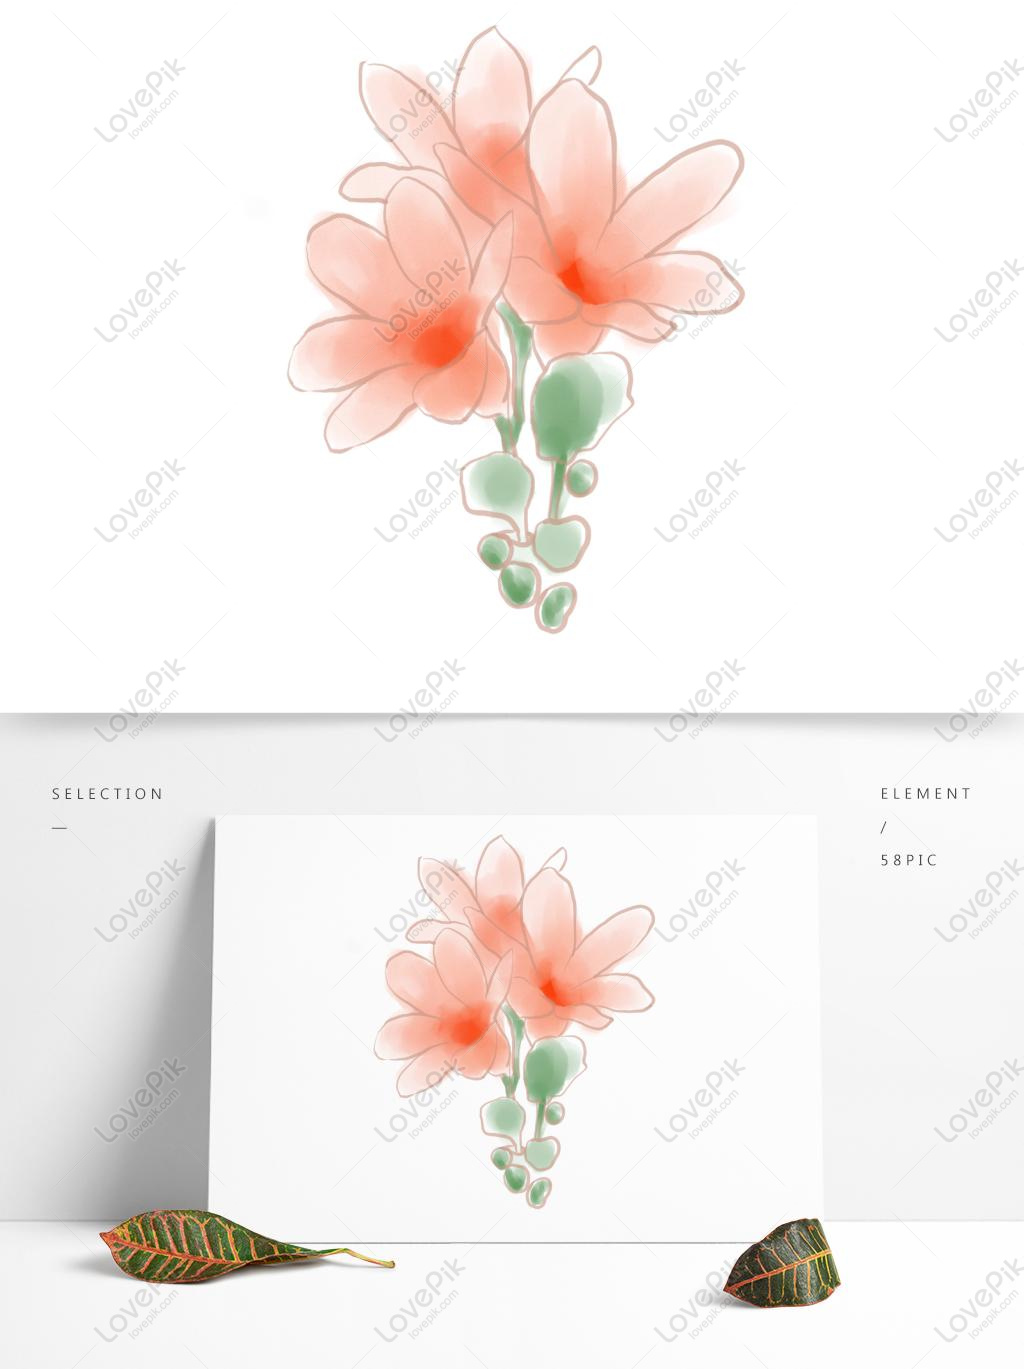 Three Flowers PNG Images With Transparent Background | Free ...